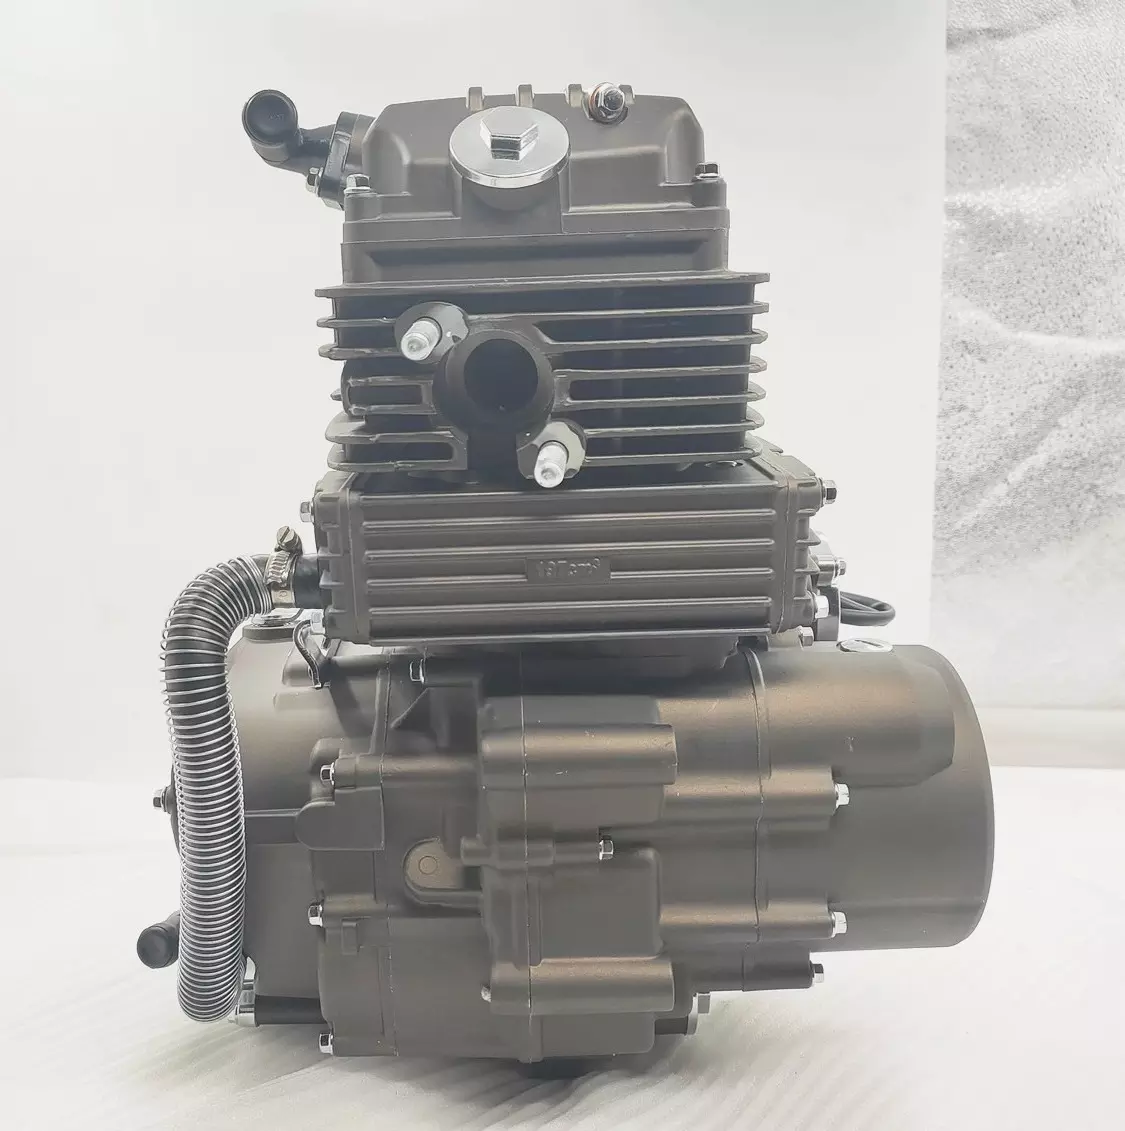 Hot sale quality  CG200 super cool  gasoline engine tricycle parts Reliable China CCC power engine for adult tricycle